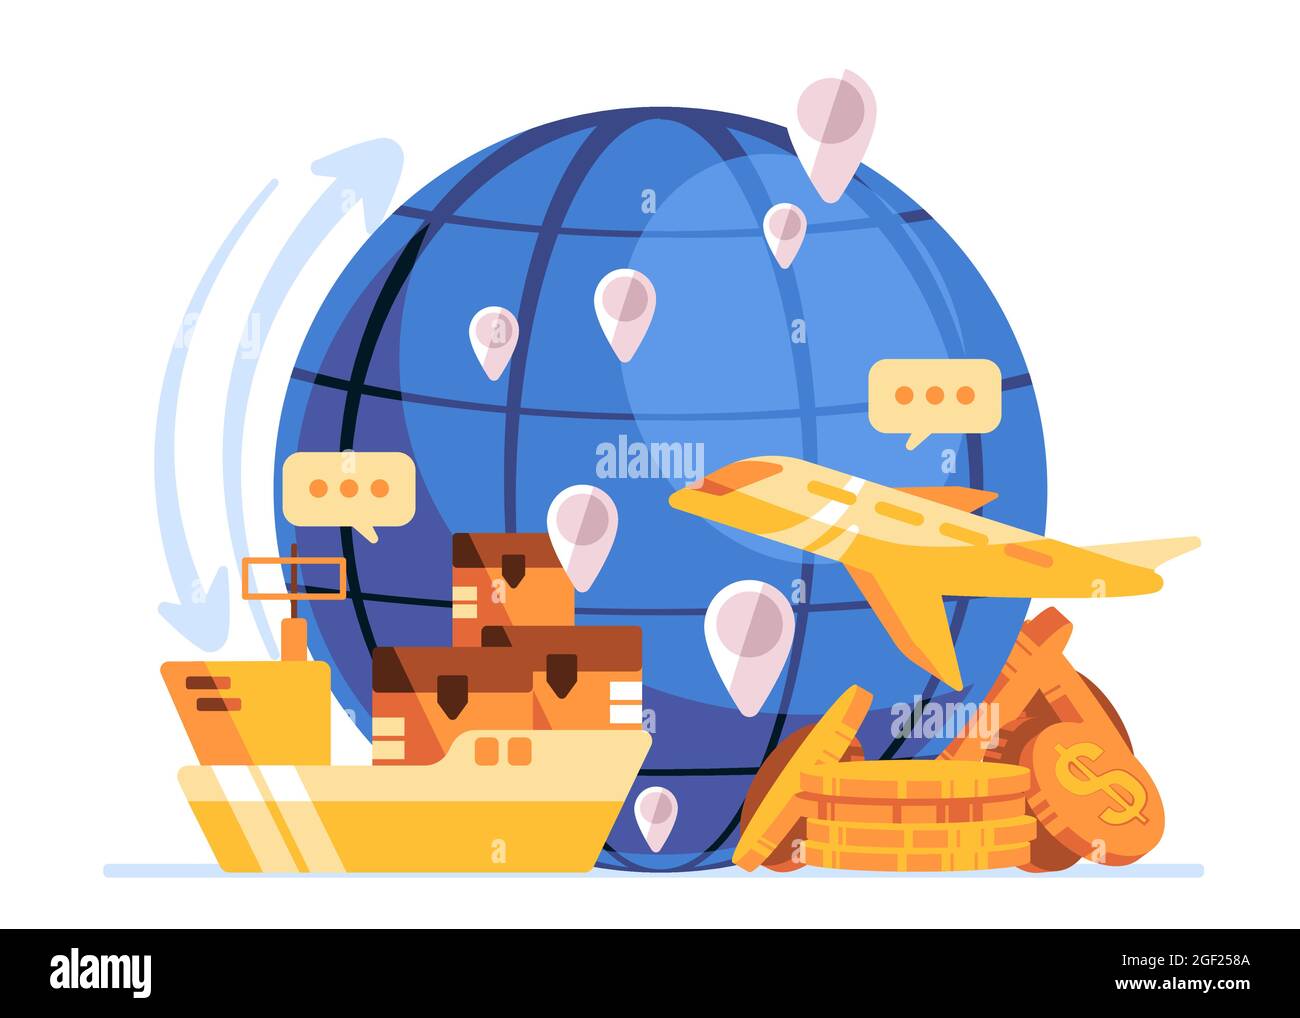 blue globe with icon of shipping, plane, dollar currency, global trading between countries make the war of tariff trade Stock Vector